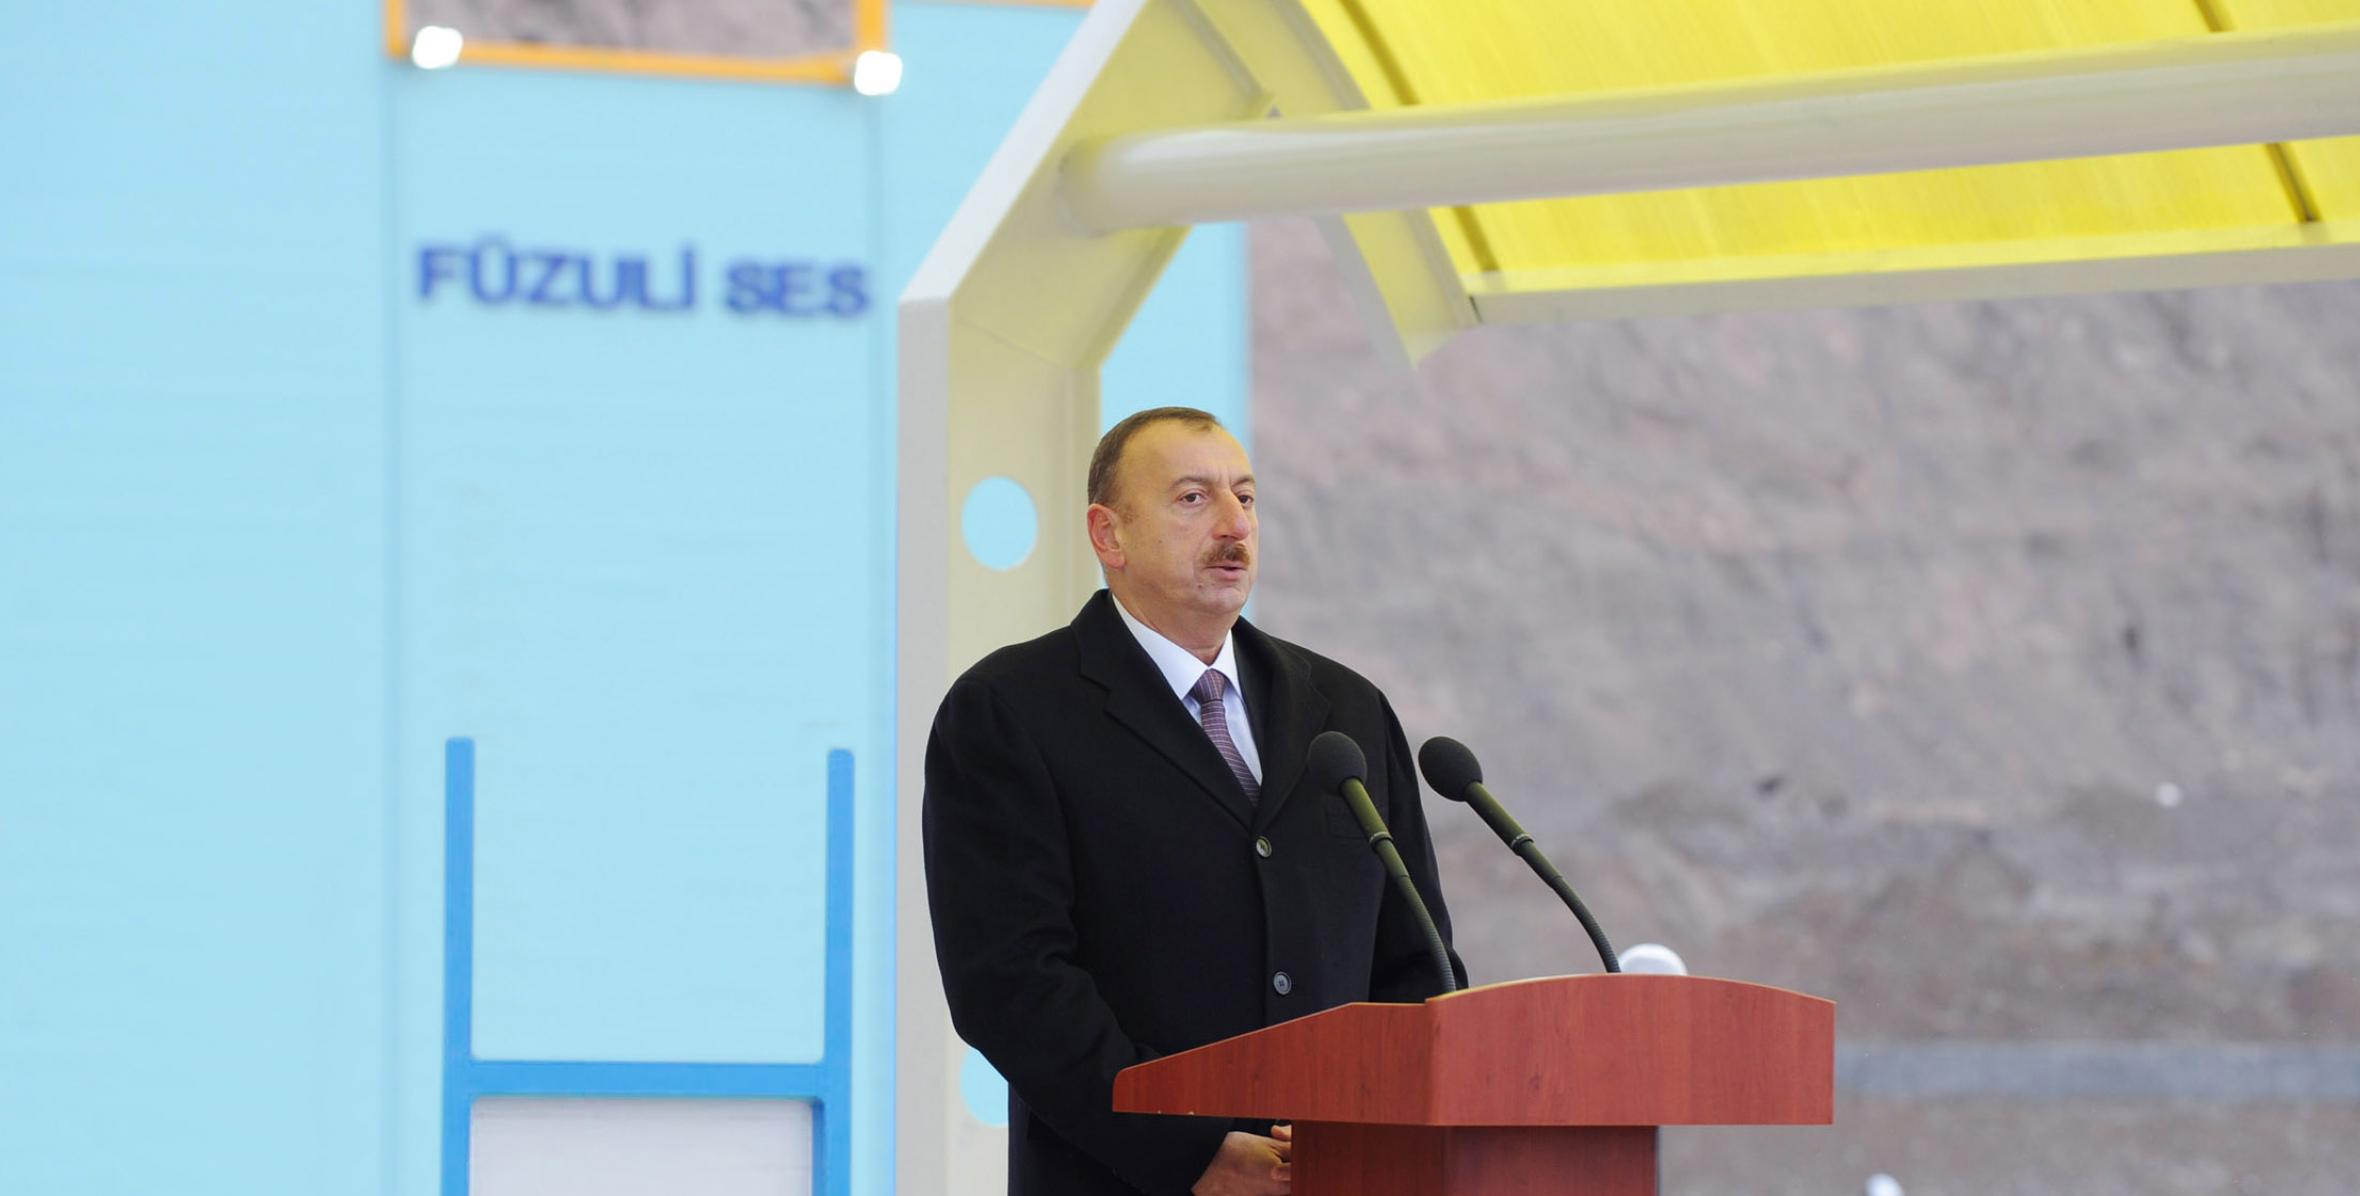 Ilham Aliyev attended the opening of the Fuzuli Hydroelectric Power Station